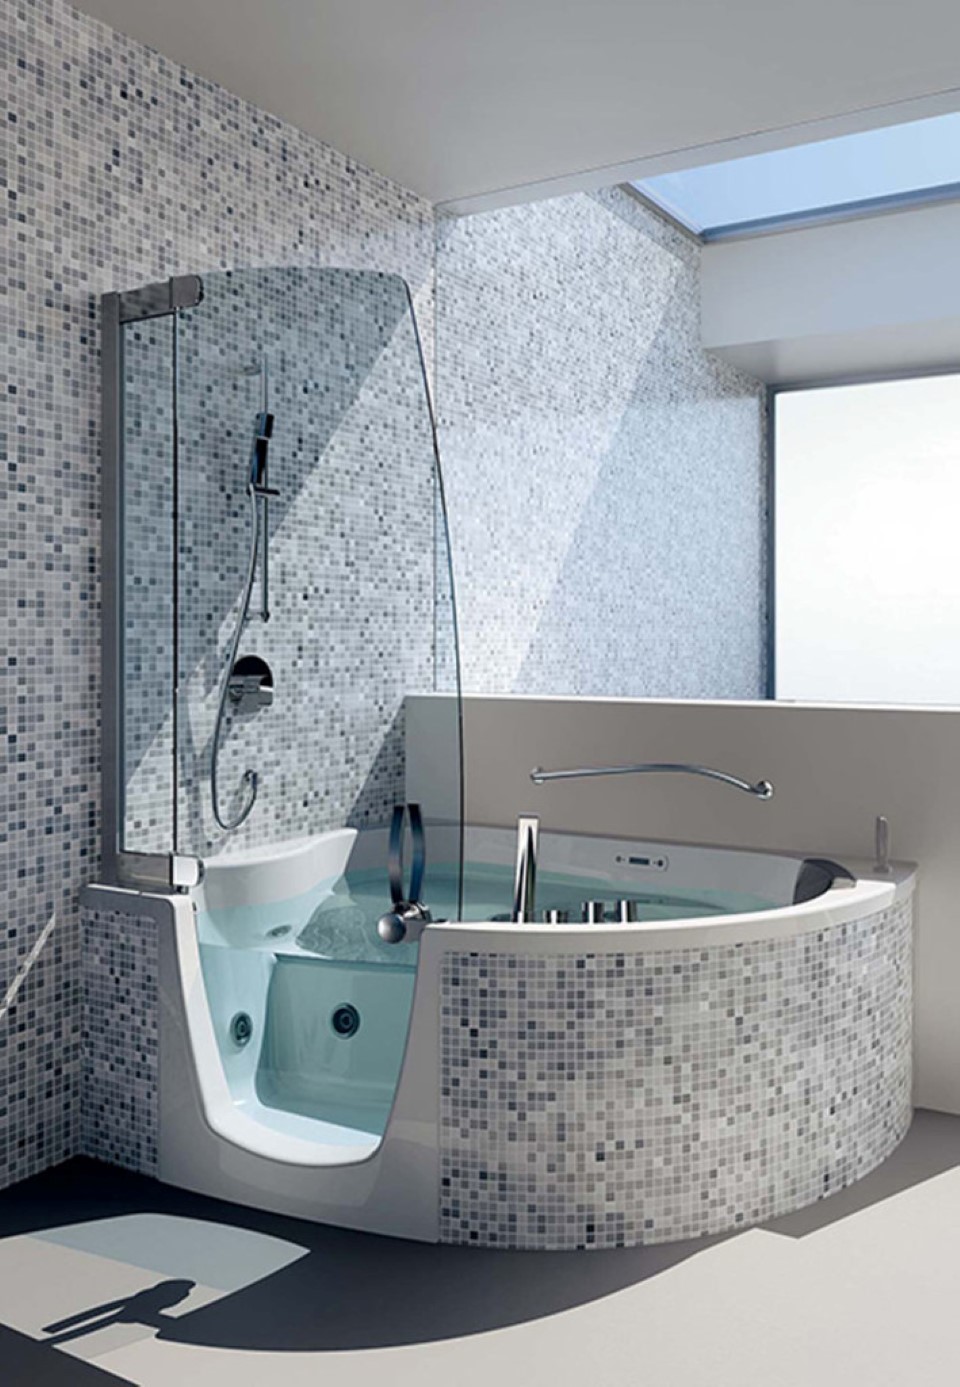 Mosaic Tile Hot Luxury Mosaic Tile Wall And Hot Tub Panel Mixed With Modern Bathroom Shower Head Hose Plus Glass Door Bathroom Shower Bathroom Ideas For Your Modern Home Design